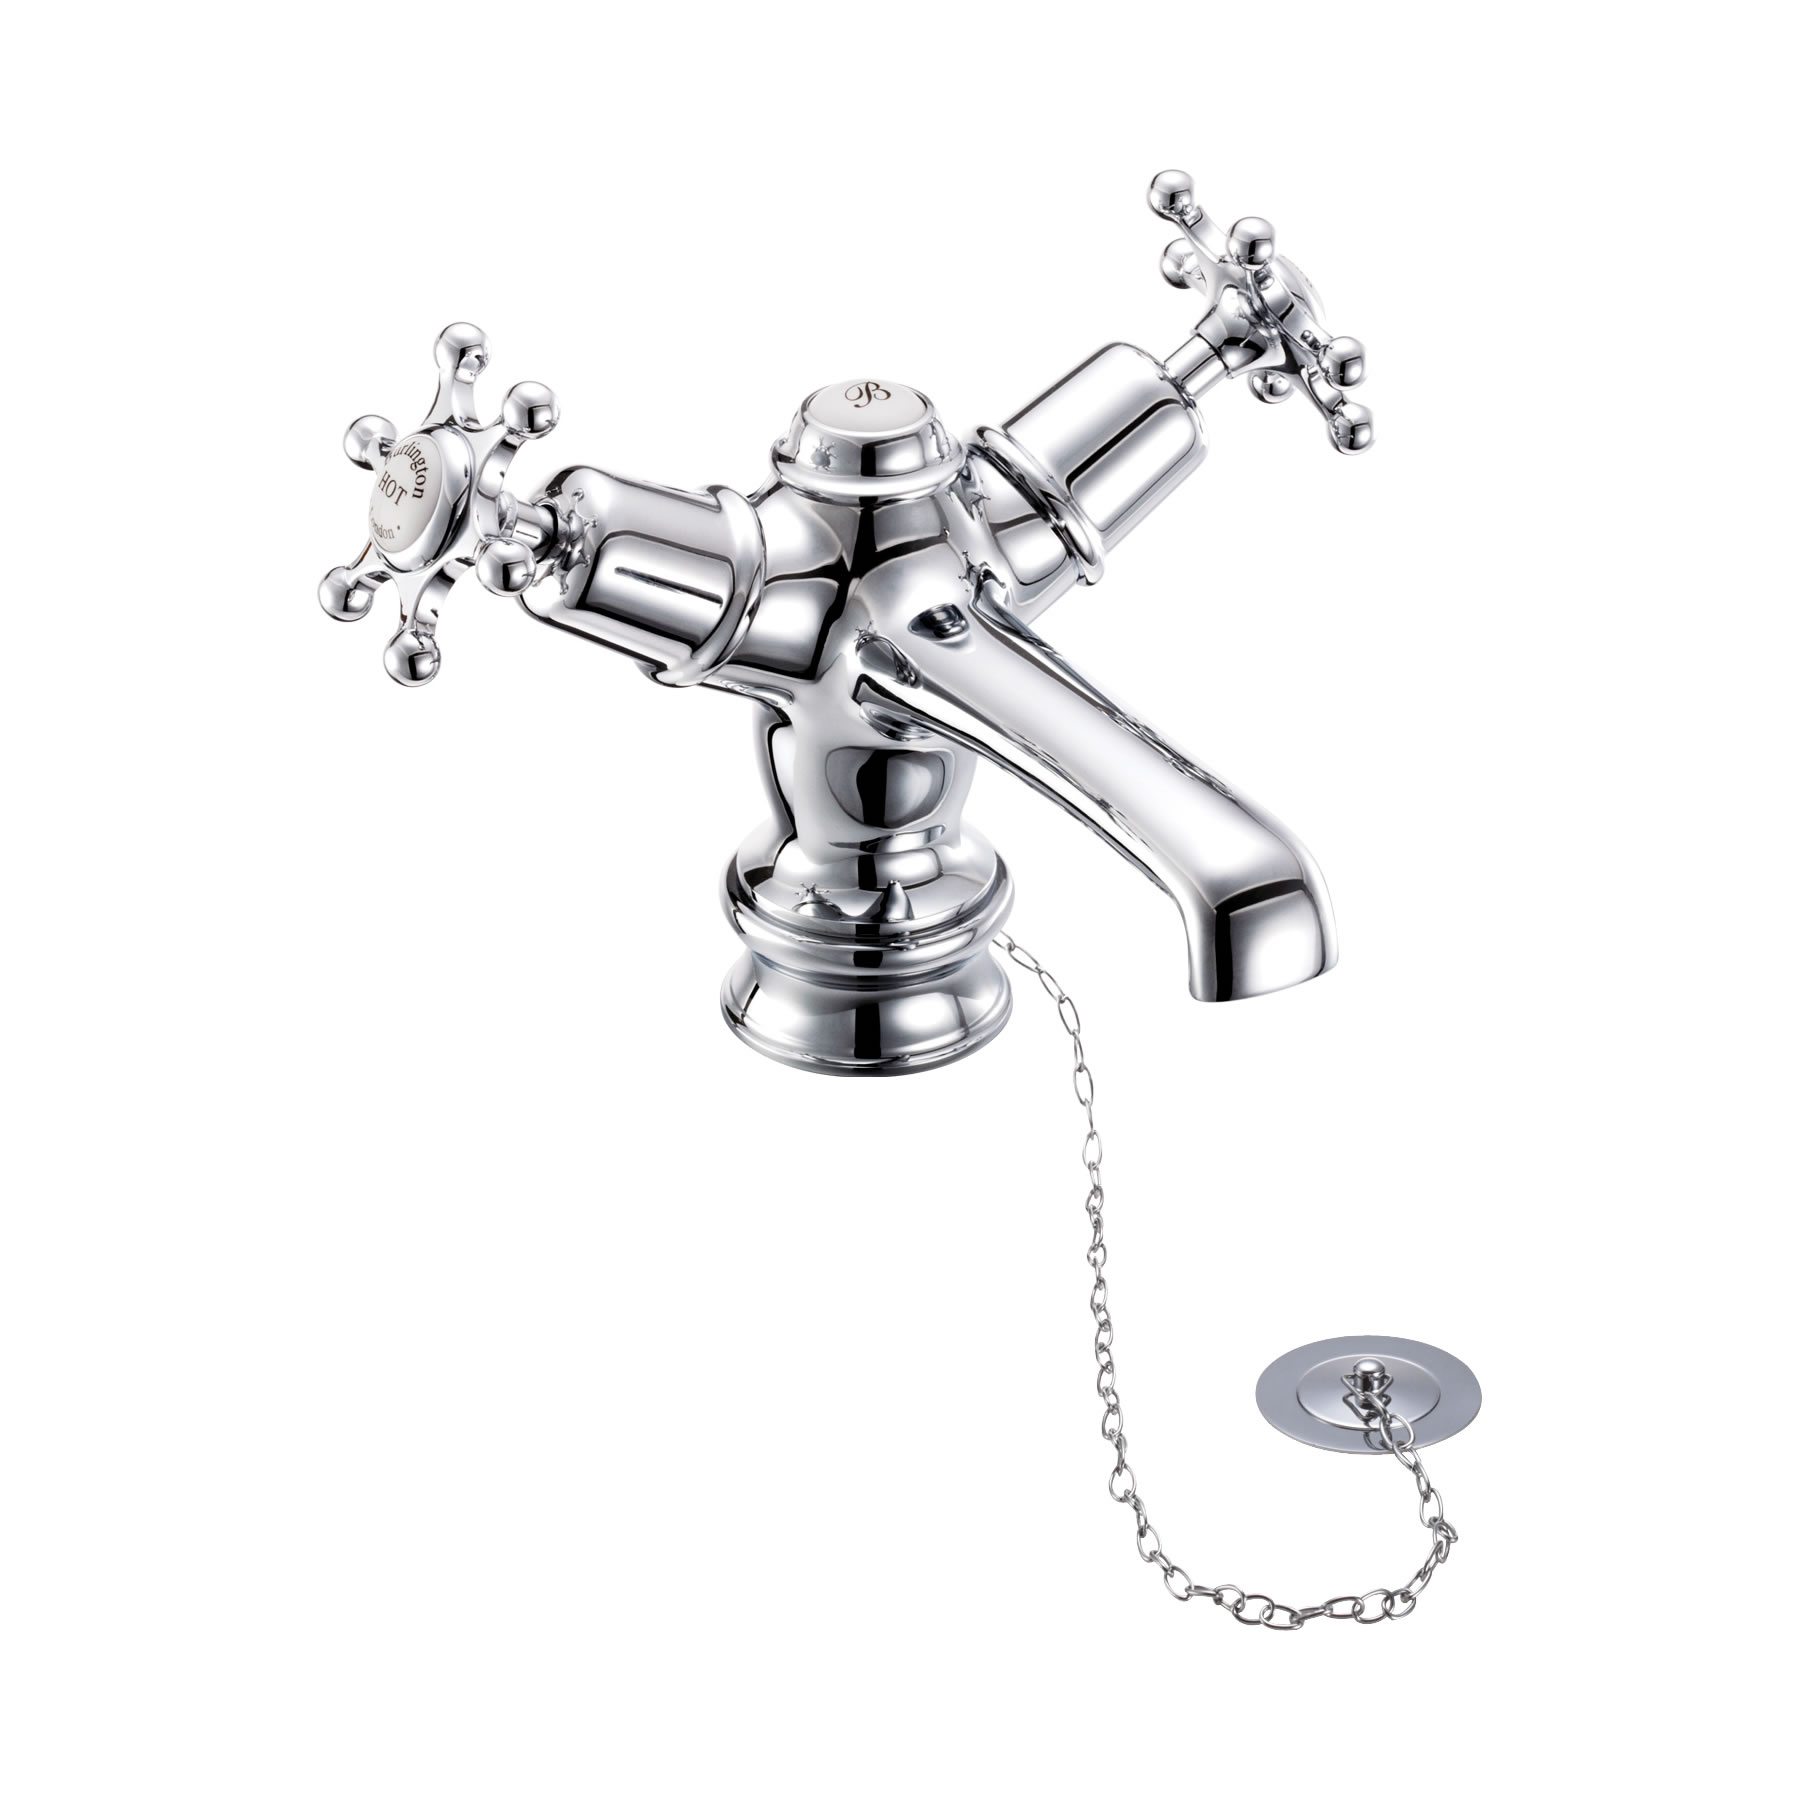 Birkenhead Regent basin mixer with low central indice with plug and chain waste